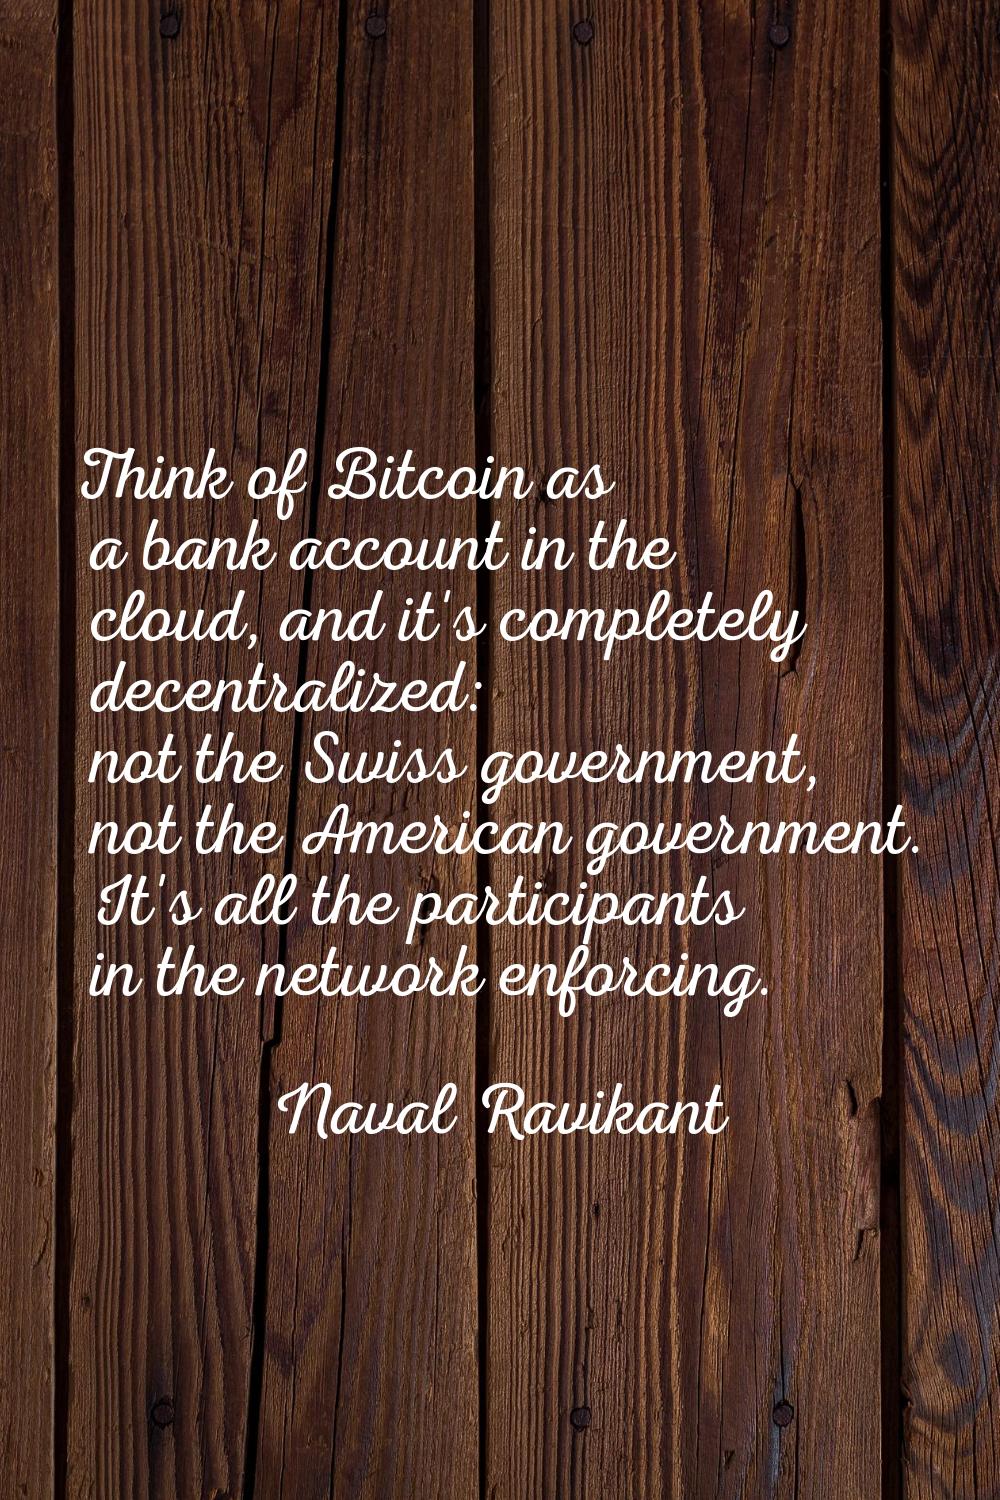 Think of Bitcoin as a bank account in the cloud, and it's completely decentralized: not the Swiss g